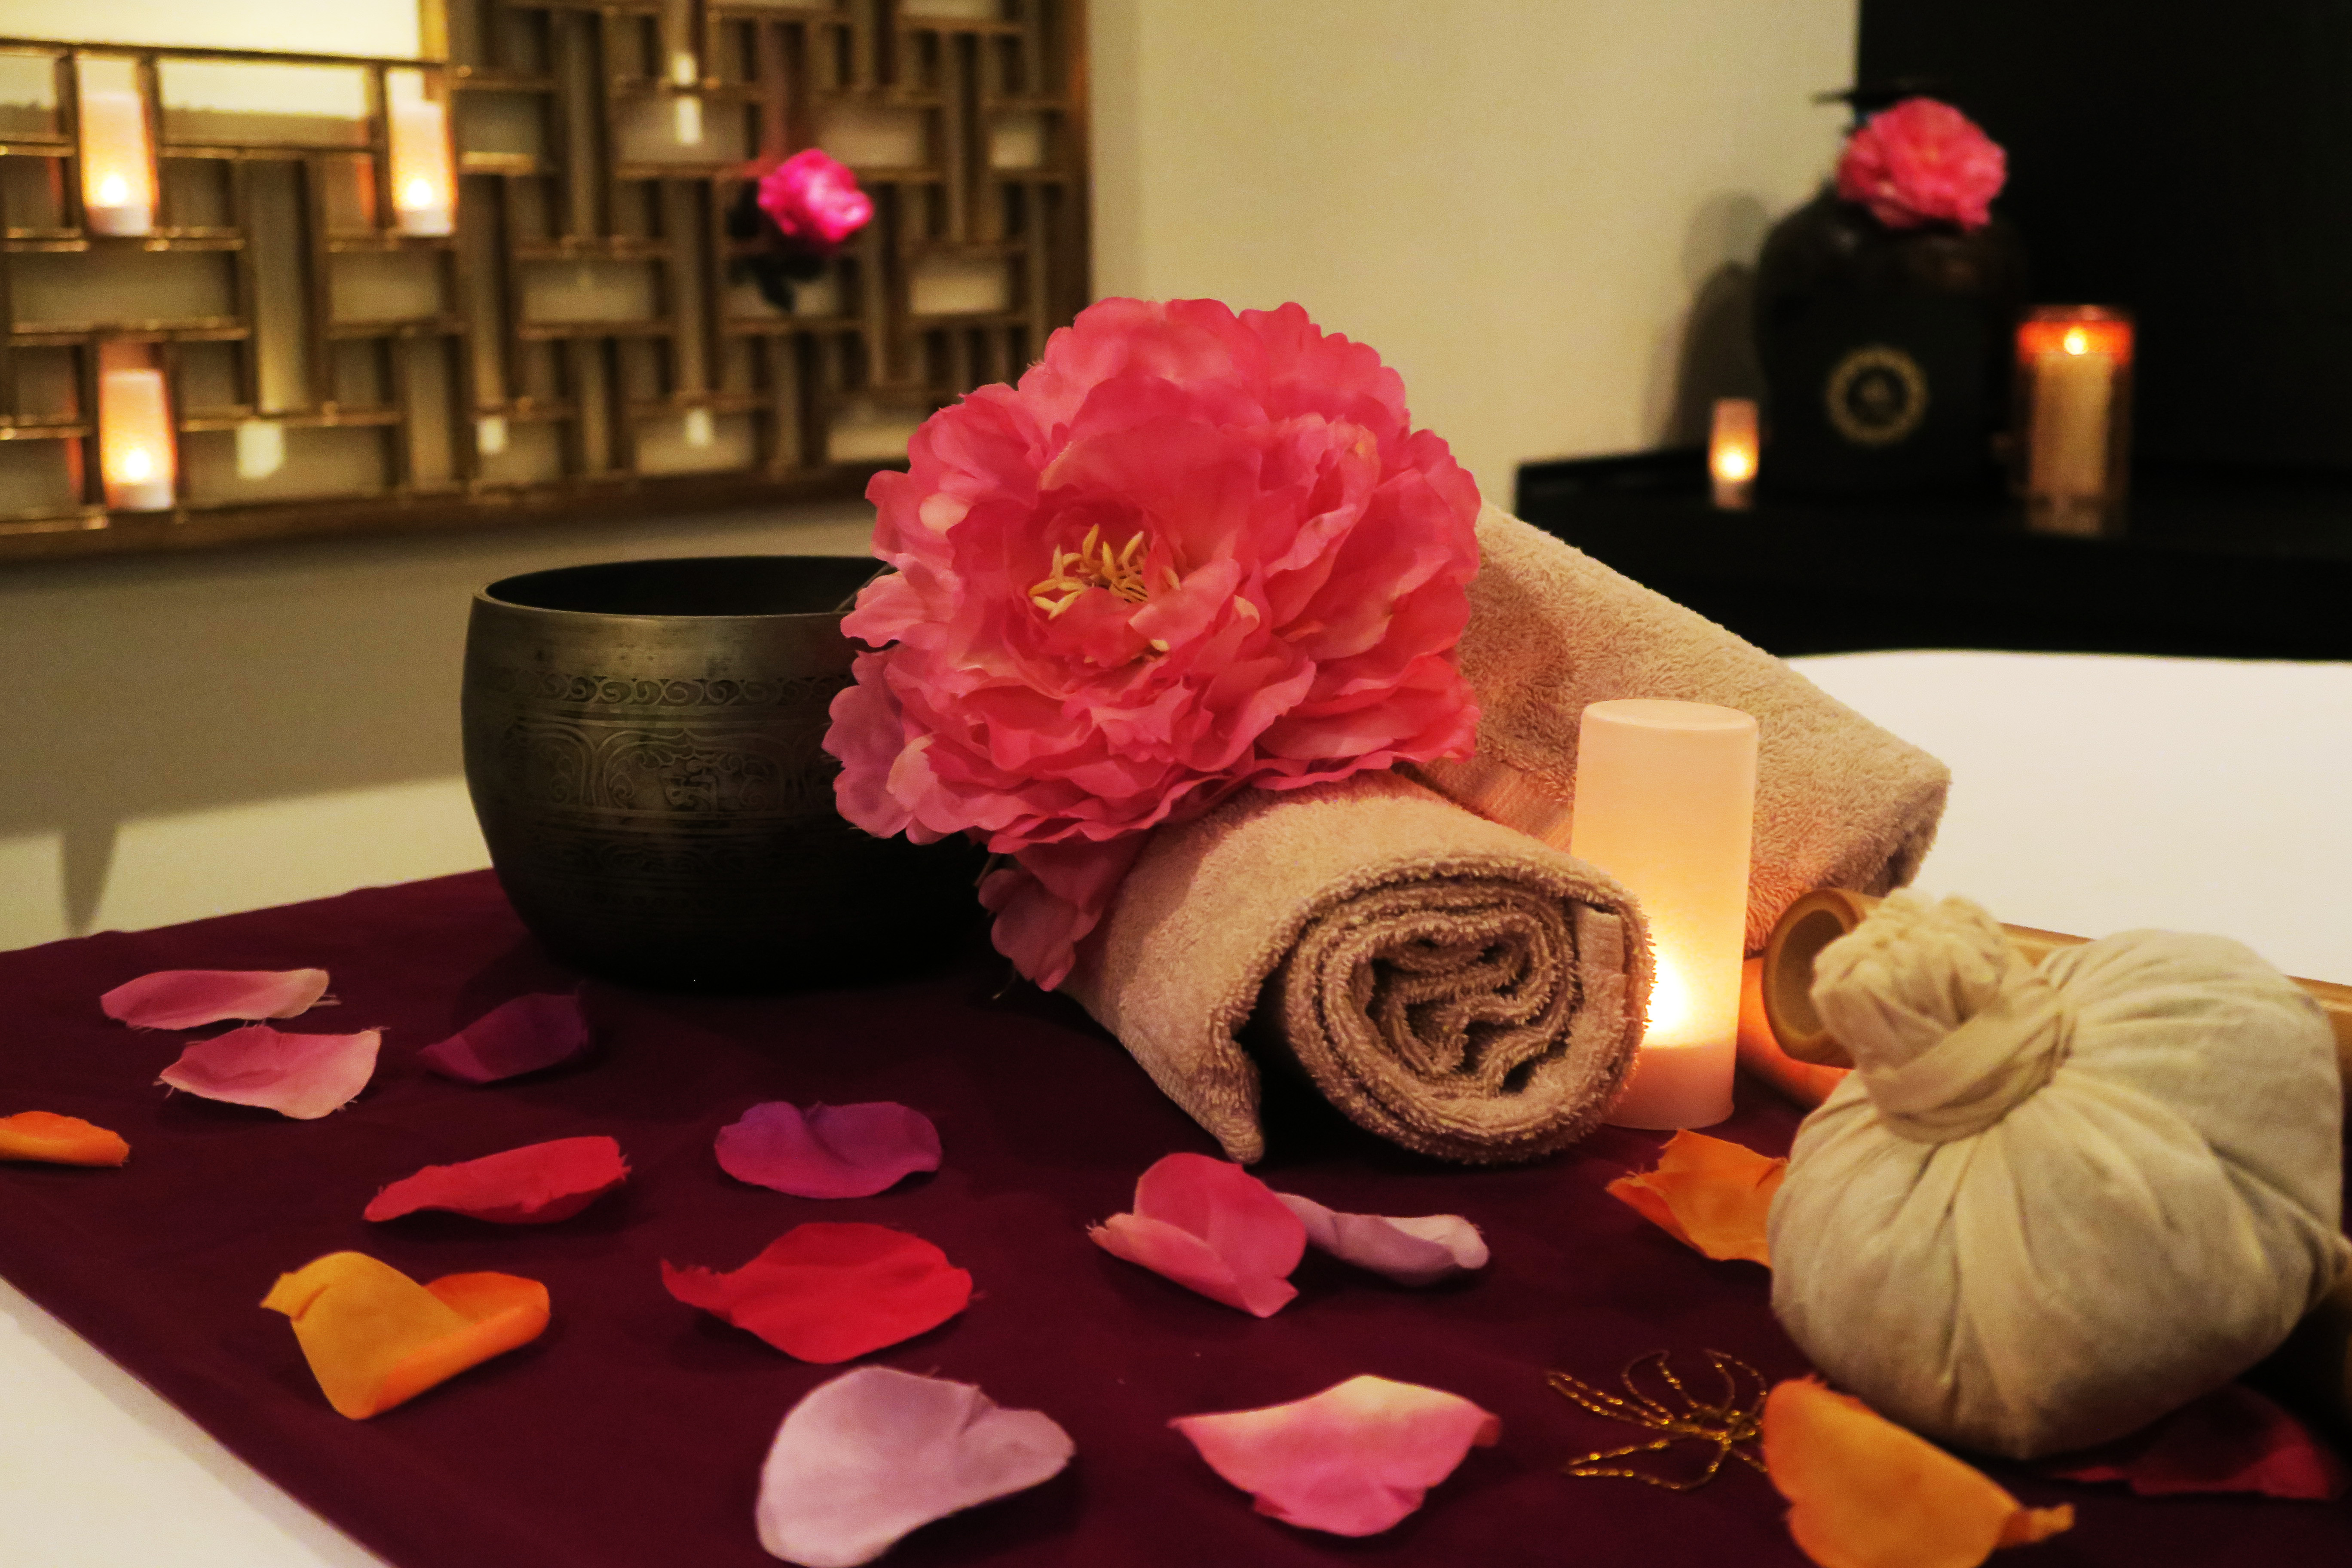 Flower Petals and Candle in Spa Treatment Room